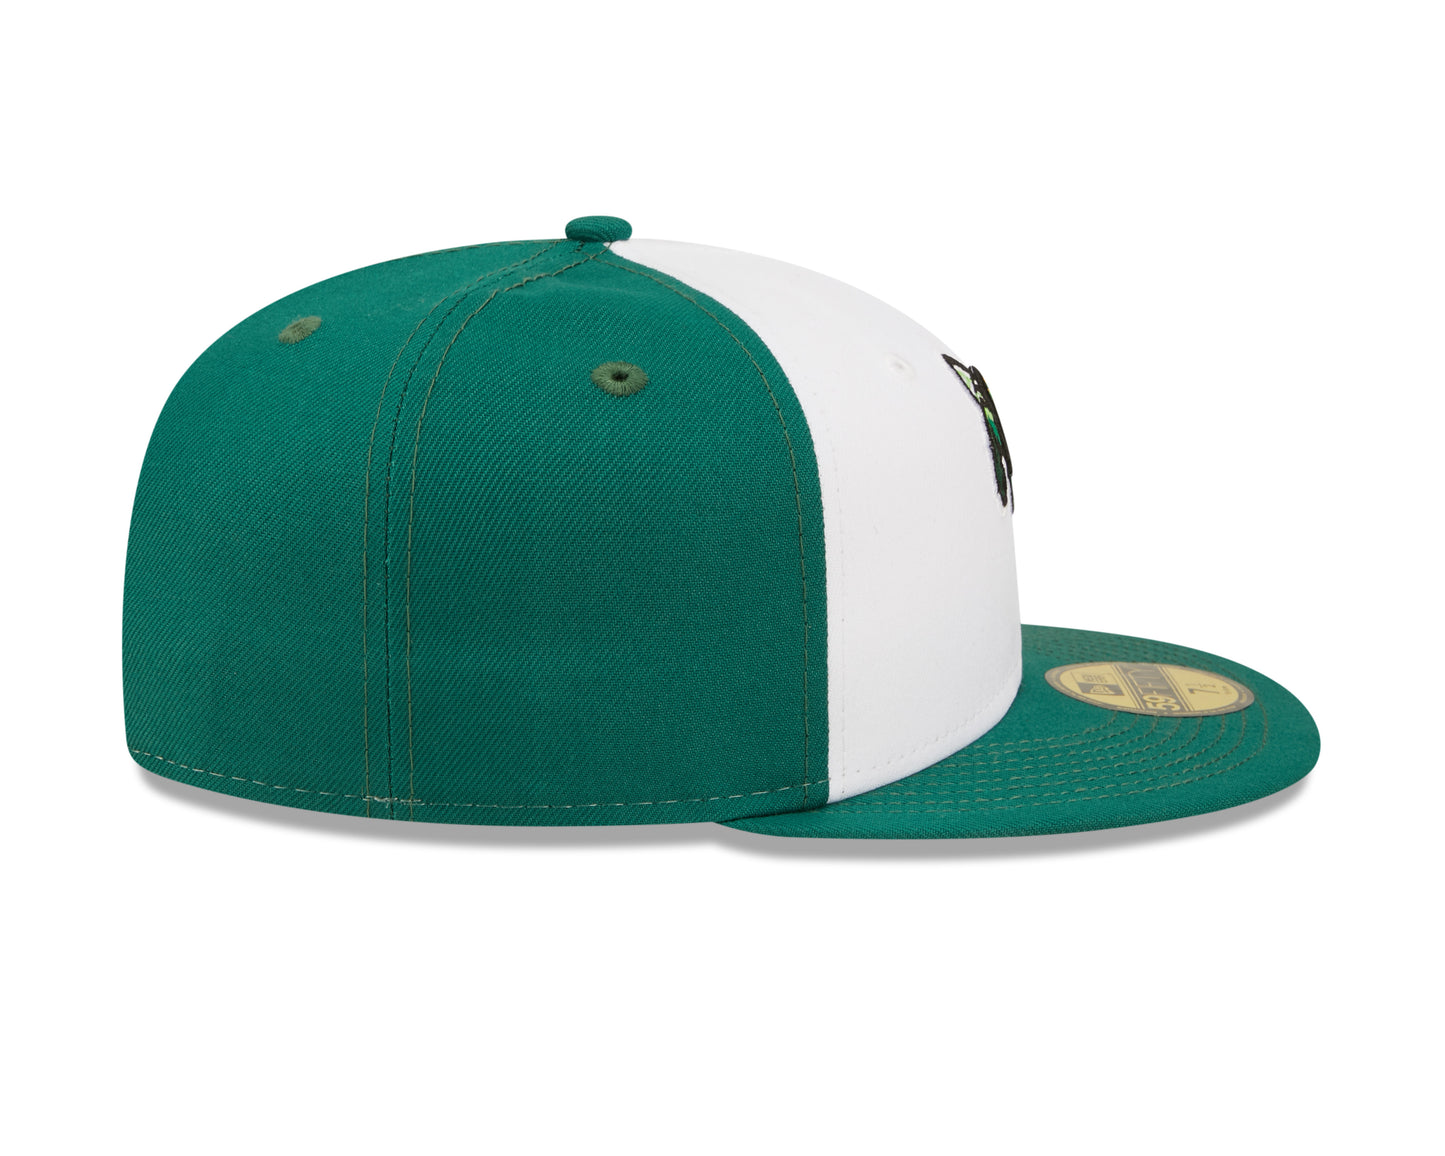 New Era - 59fifty Fitted - MiLB - AC Perf - Augusta Green Jackets - Black - Headz Up 